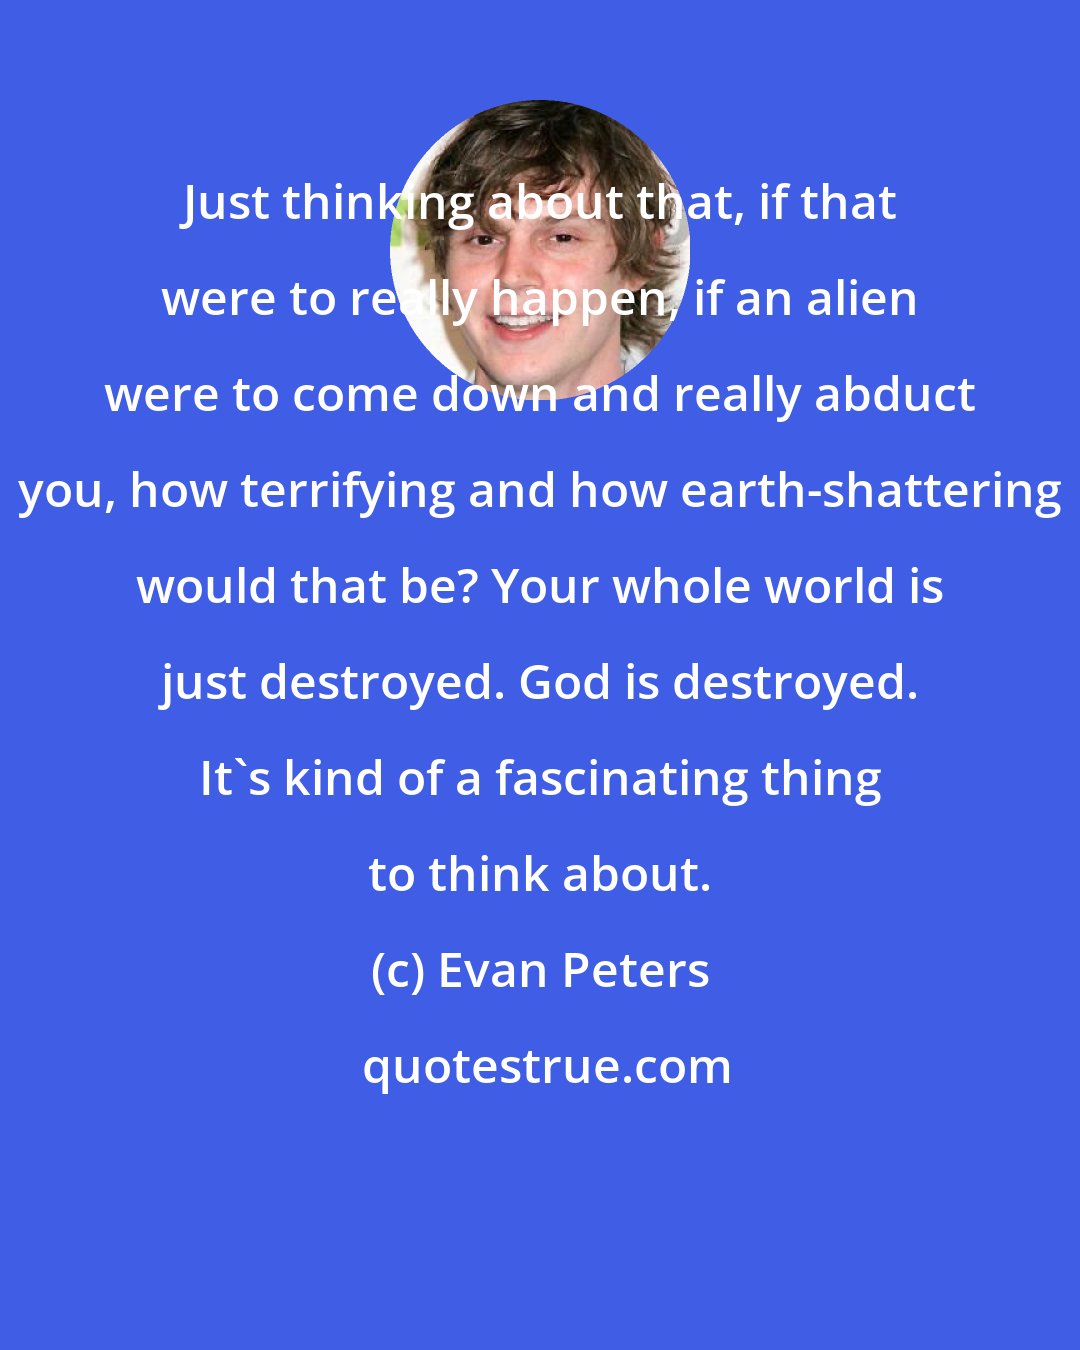 Evan Peters: Just thinking about that, if that were to really happen, if an alien were to come down and really abduct you, how terrifying and how earth-shattering would that be? Your whole world is just destroyed. God is destroyed. It's kind of a fascinating thing to think about.